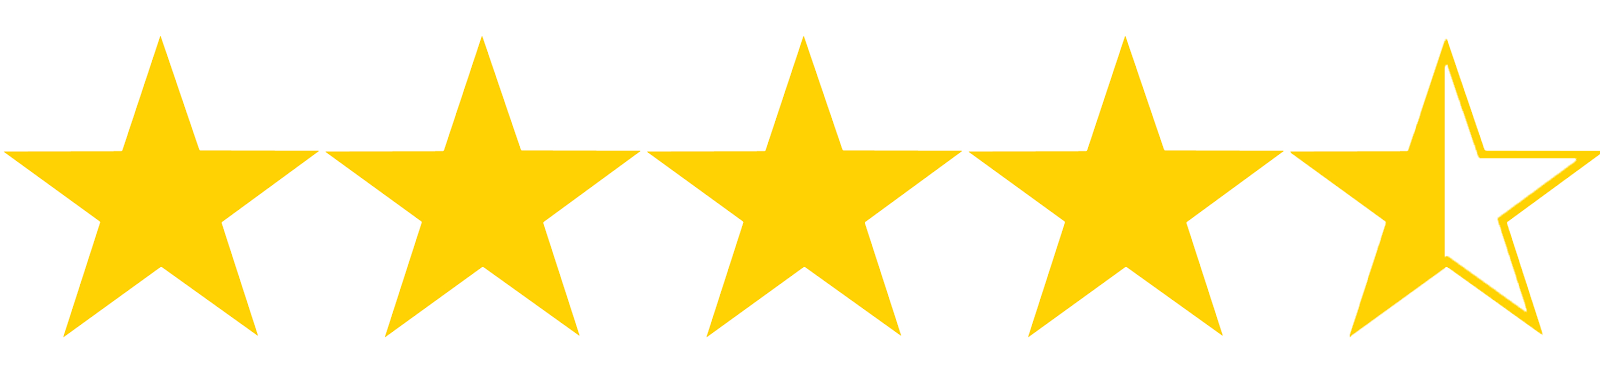 Dreamer's Corner: This is How My Five Star Rating System Works